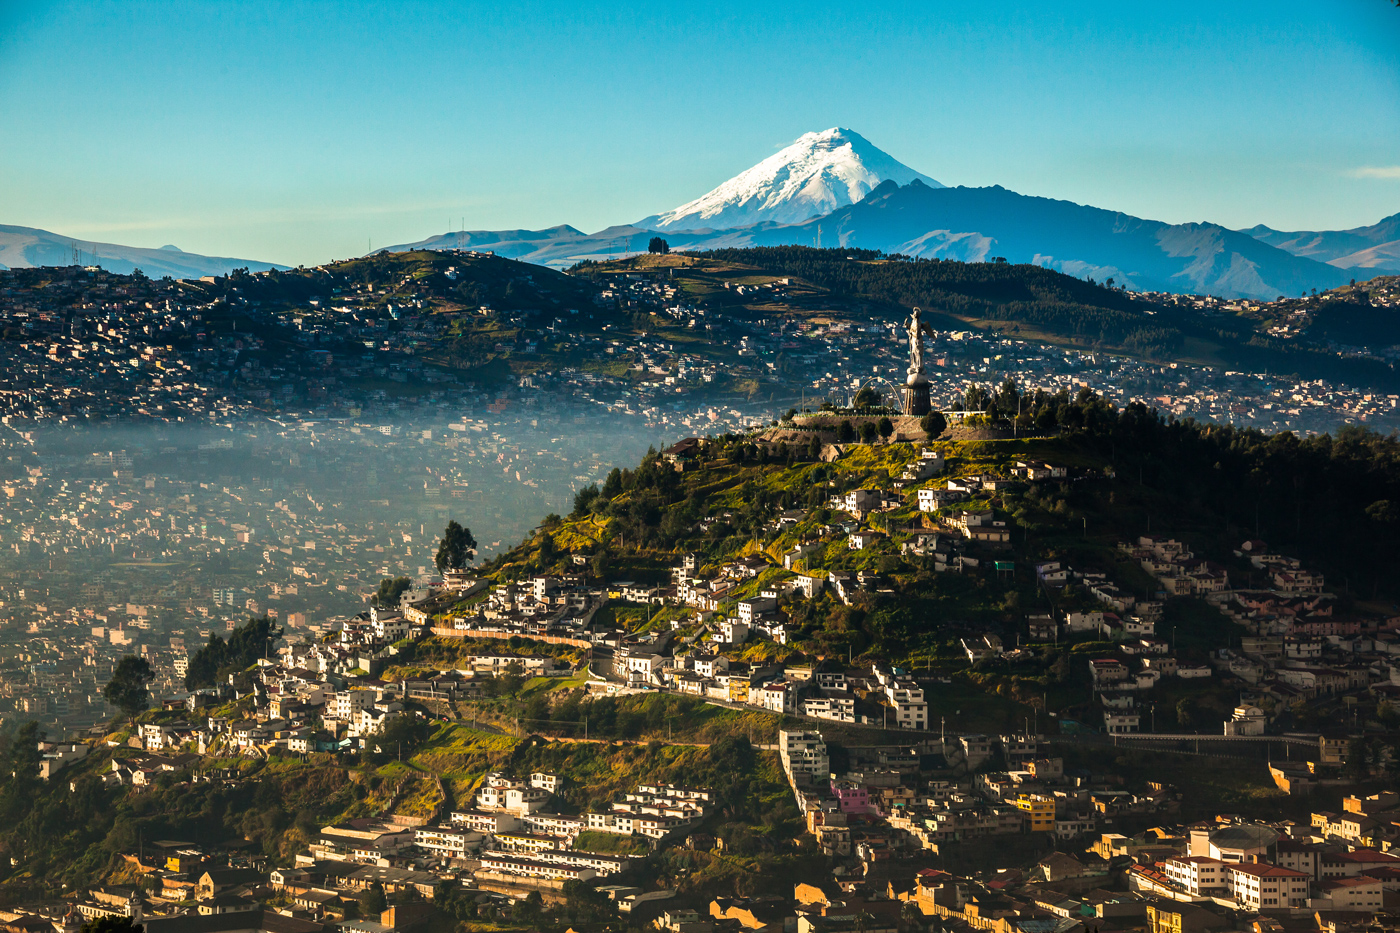 quito most instagram worthy places